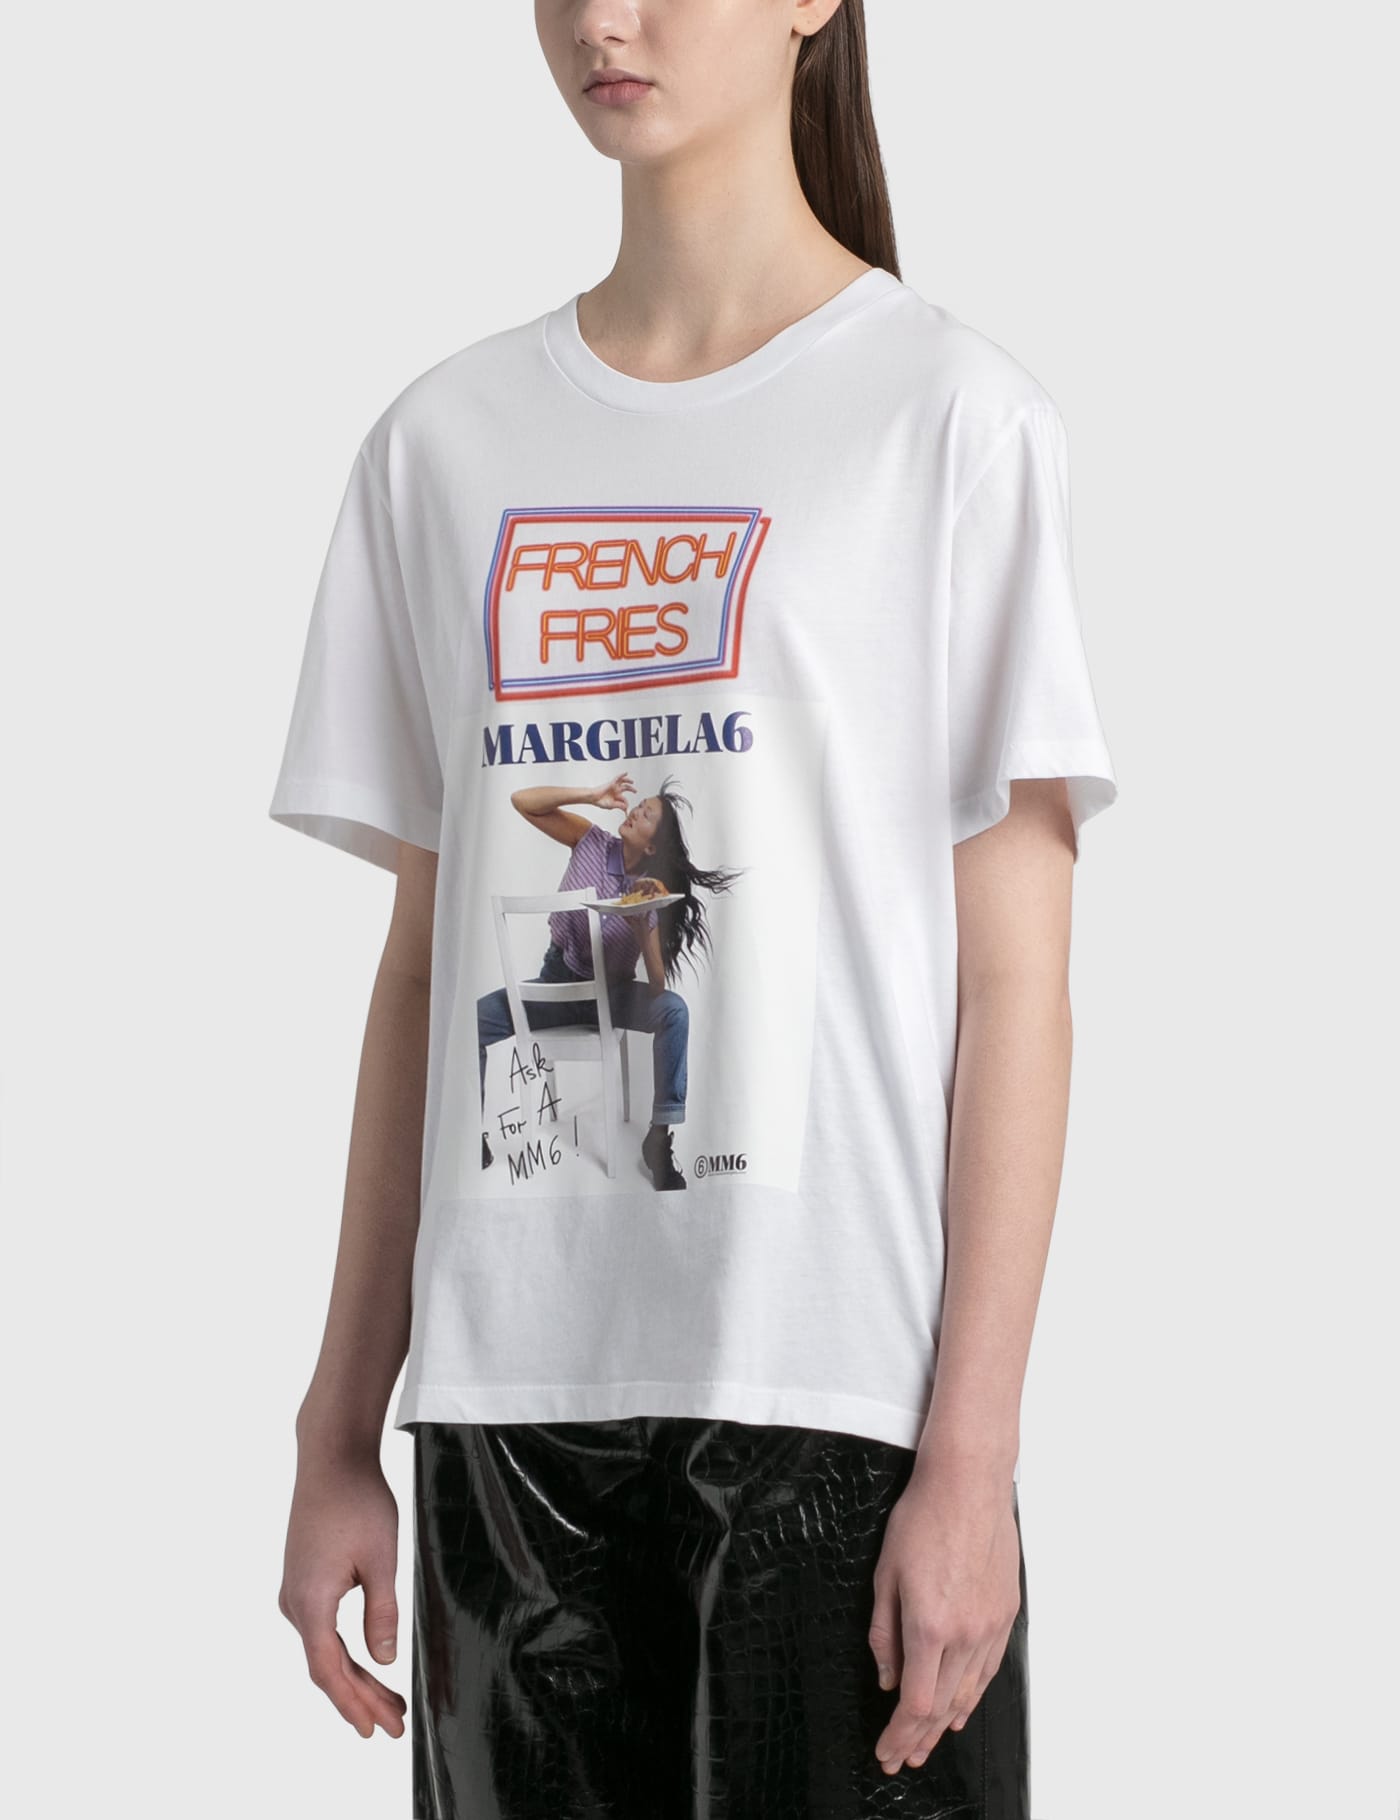 MM6 Maison Margiela - French Fries Graphic T-shirt | HBX - Globally Curated  Fashion and Lifestyle by Hypebeast